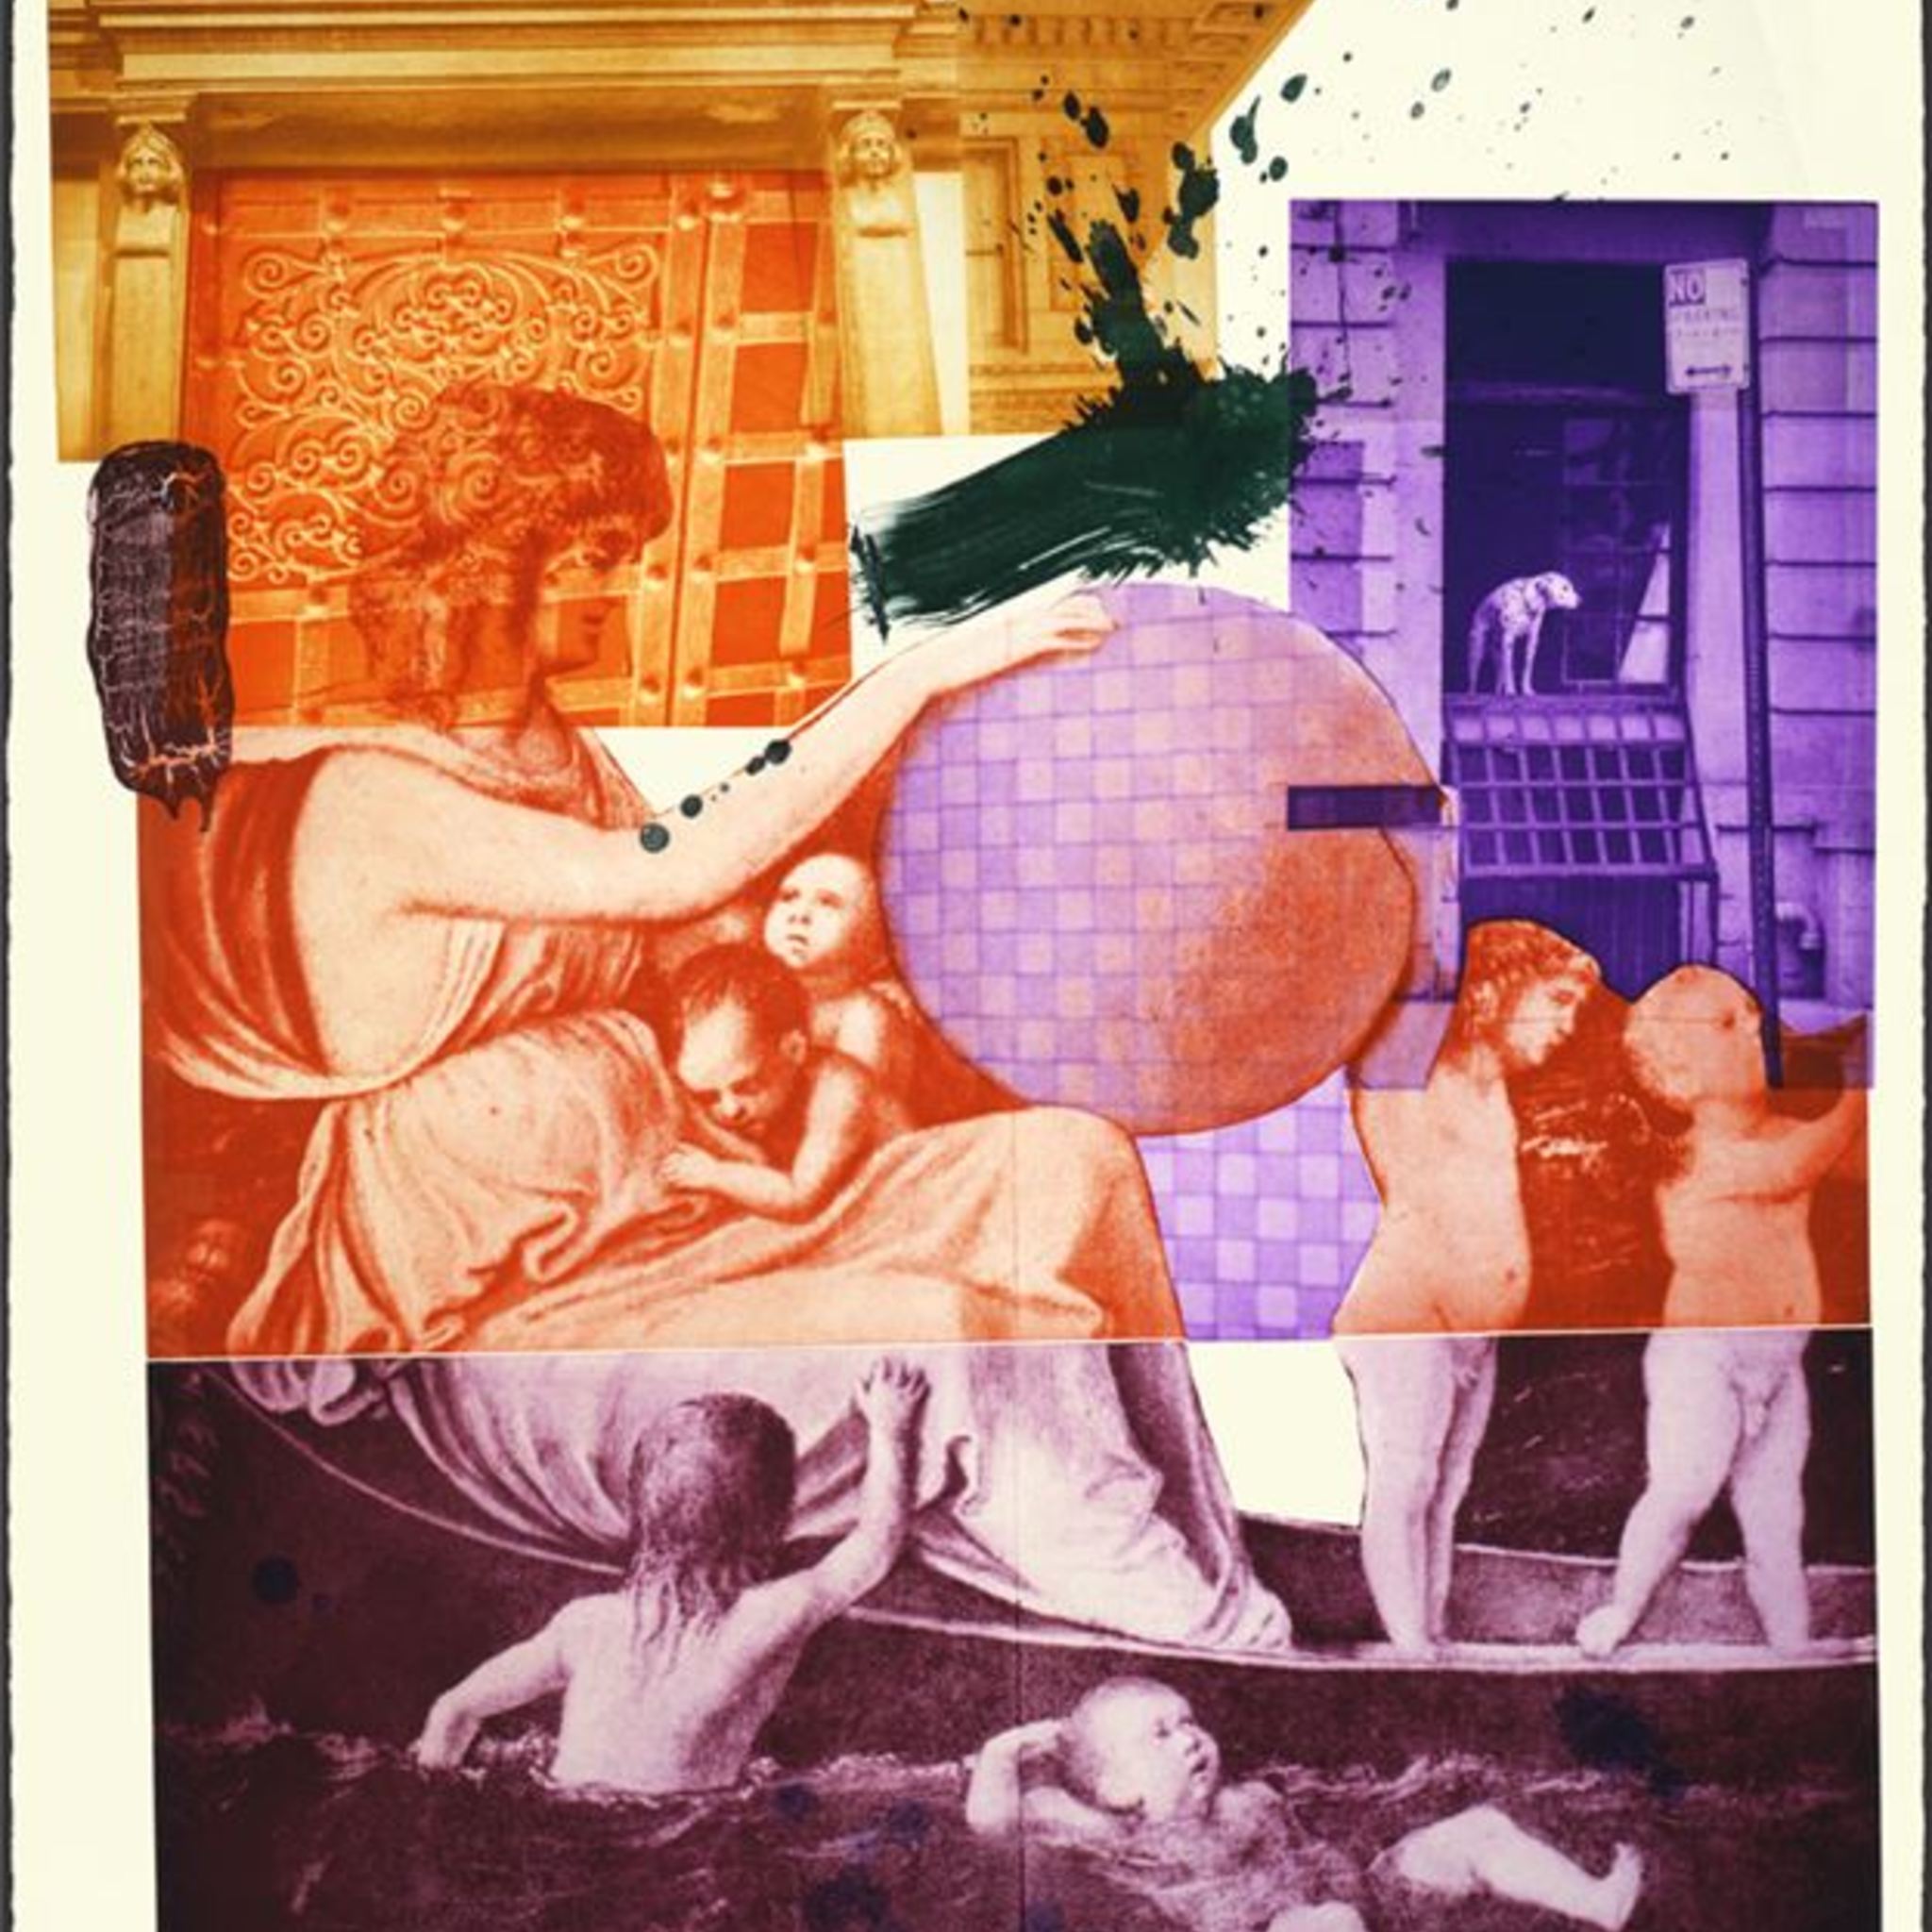 Workshop Collage in the style of pop art, the memory of Robert Rauschenberg